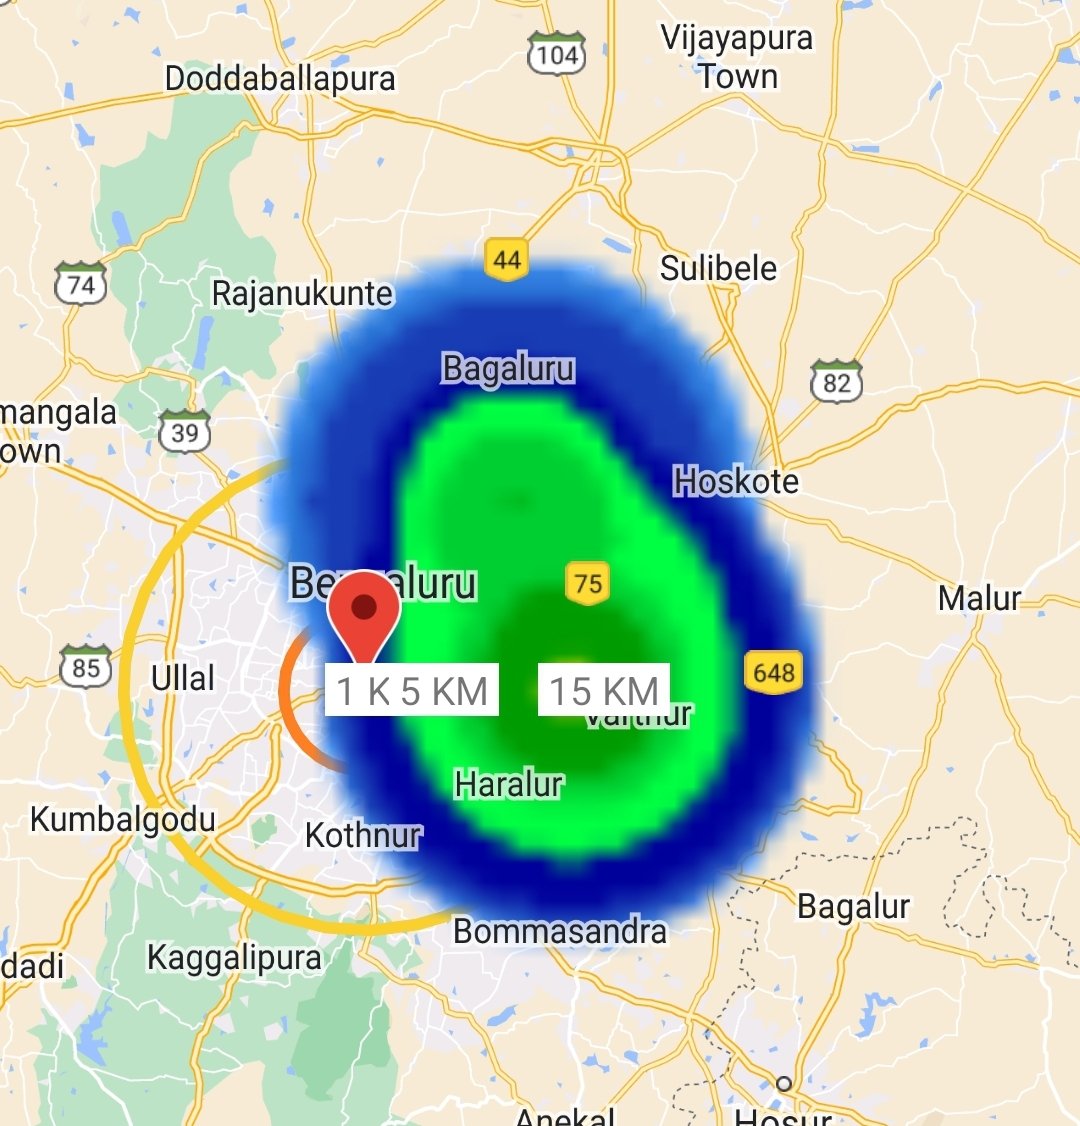 Only East and NE #Bengaluru are getting some rains.

This storm is steering poorly so other areas may not get much rain today. Don't worry guys, lot of rains in store.

#BengaluruRains #BangaloreRains #BengaluruRain